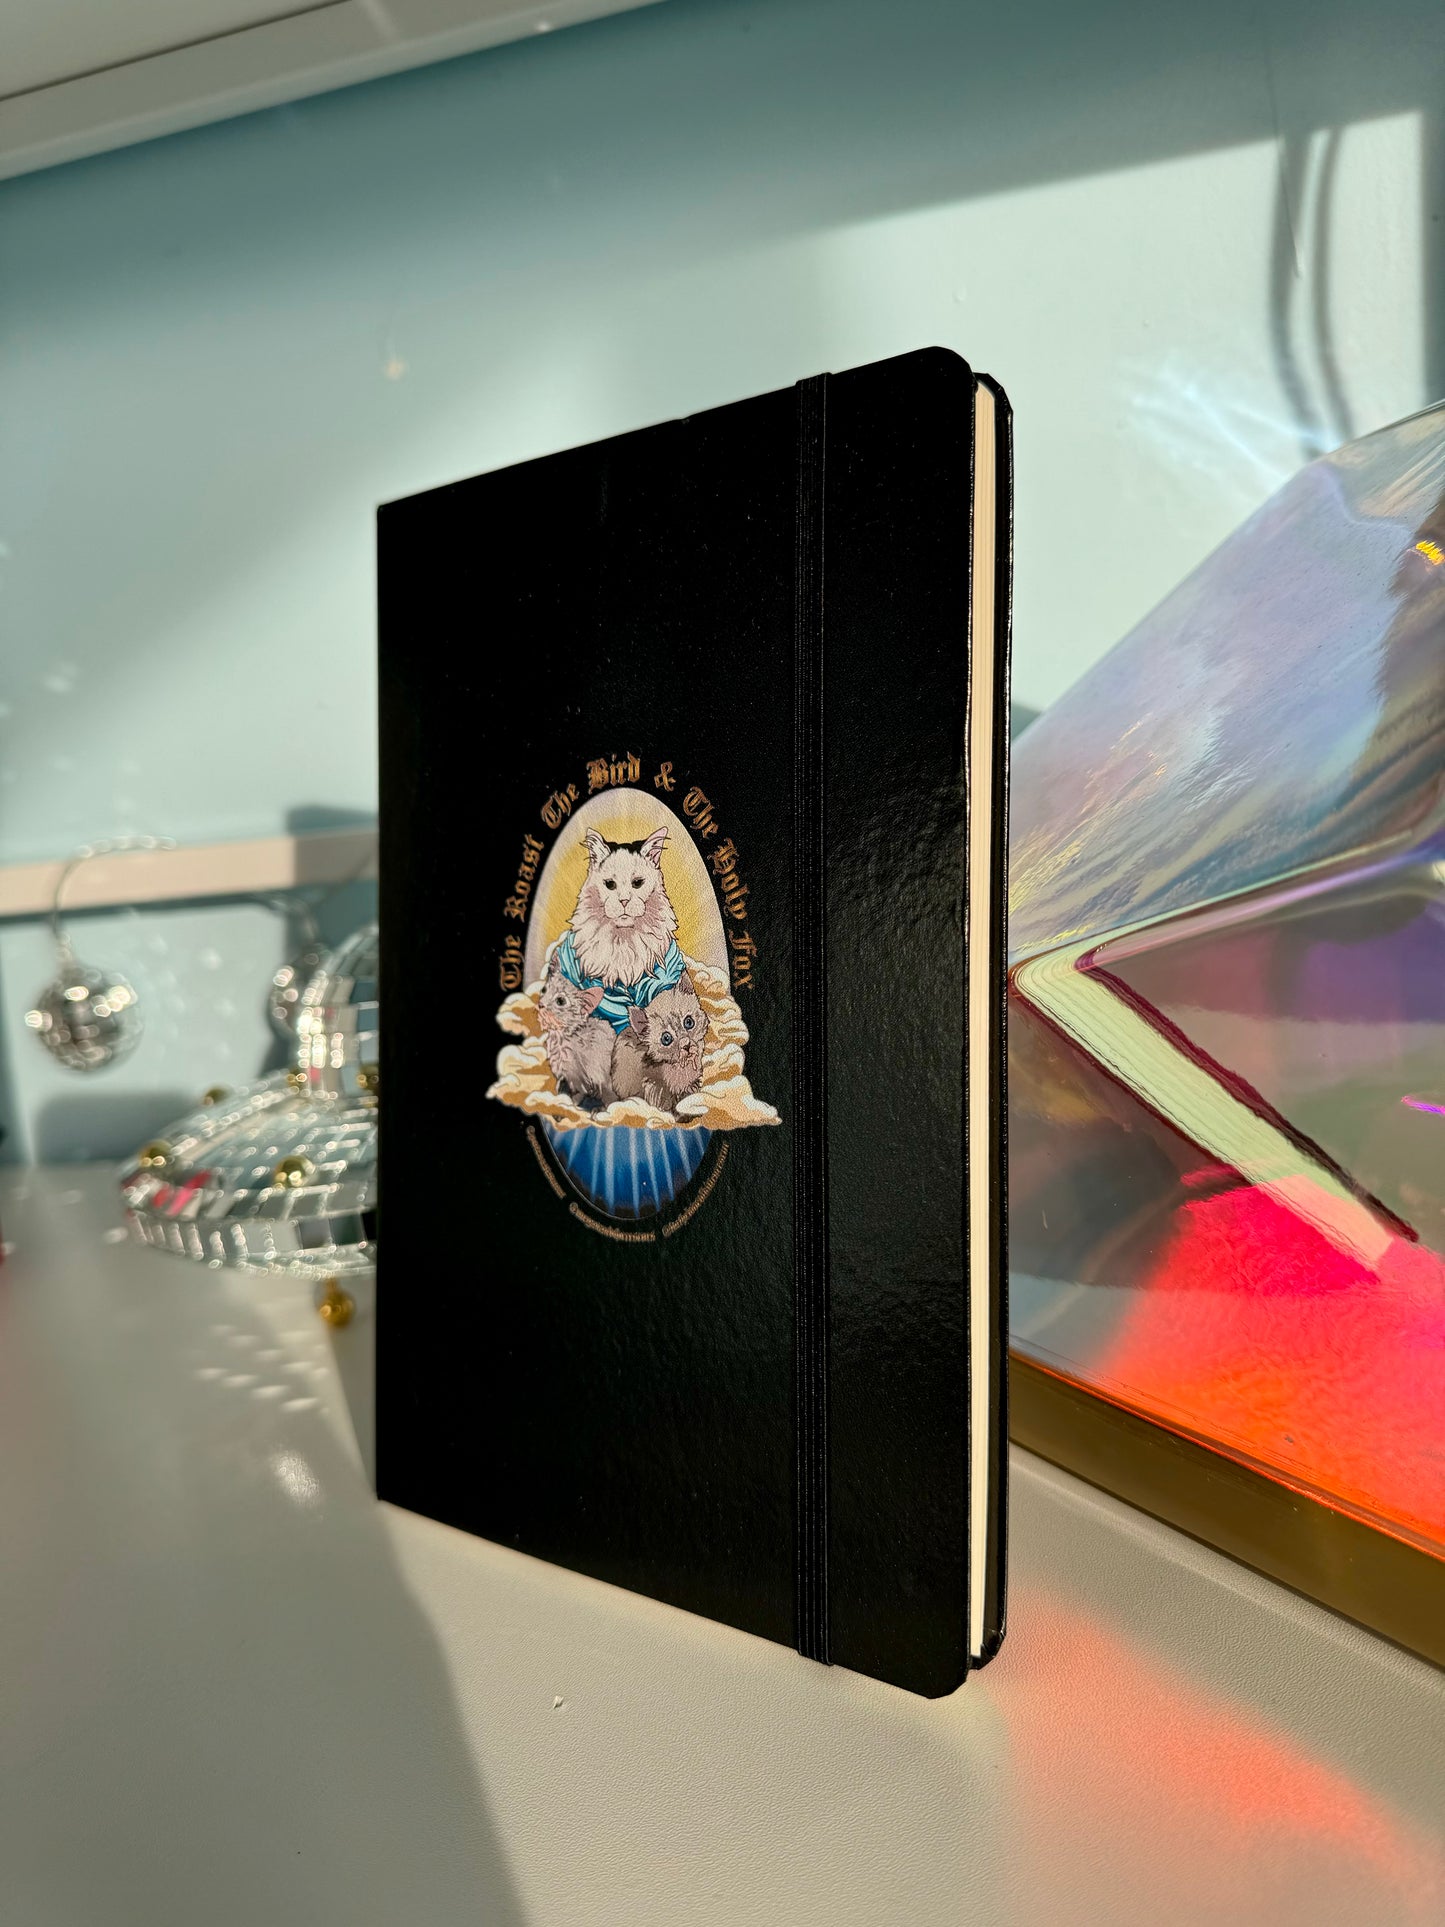 The Holy Trinity - Hardcover bound notebook